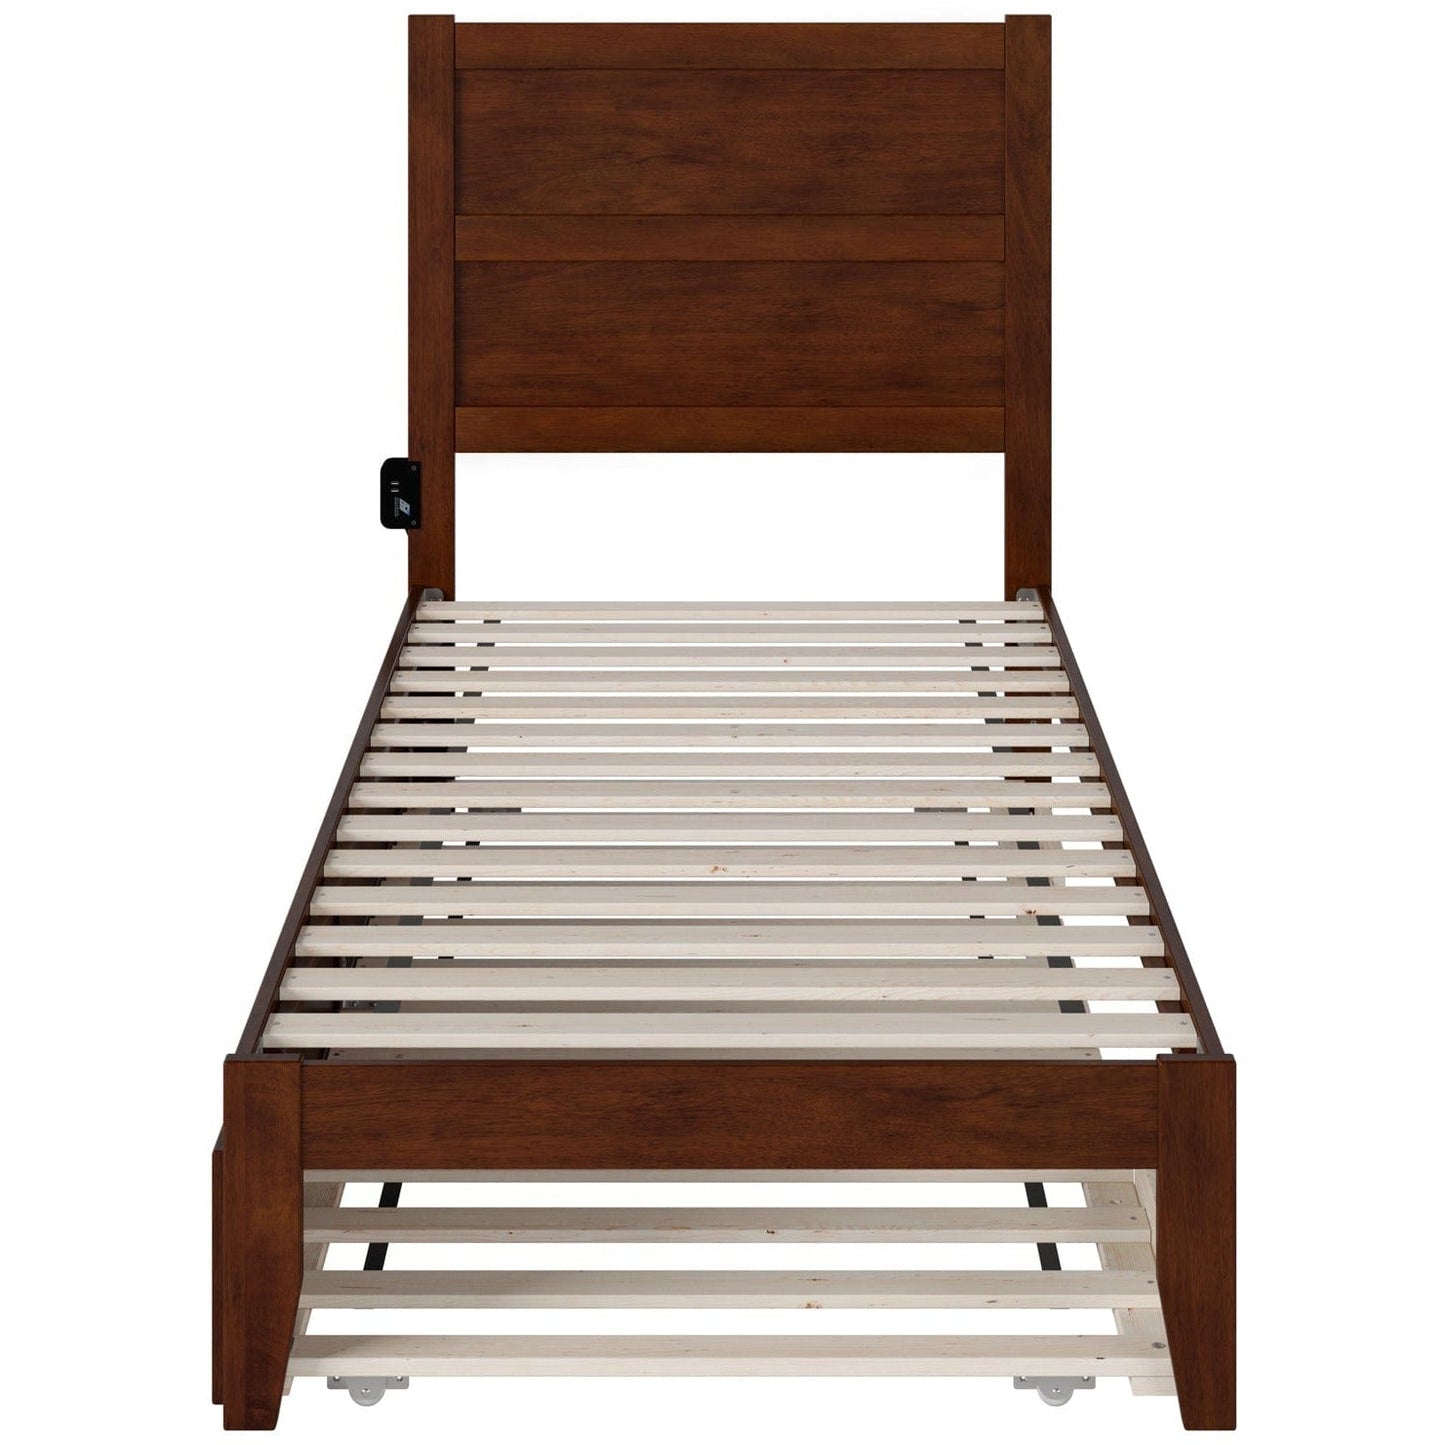 AFI Furnishings NoHo Twin Extra Long Bed with Twin Extra Long Trundle in Walnut AG9111114